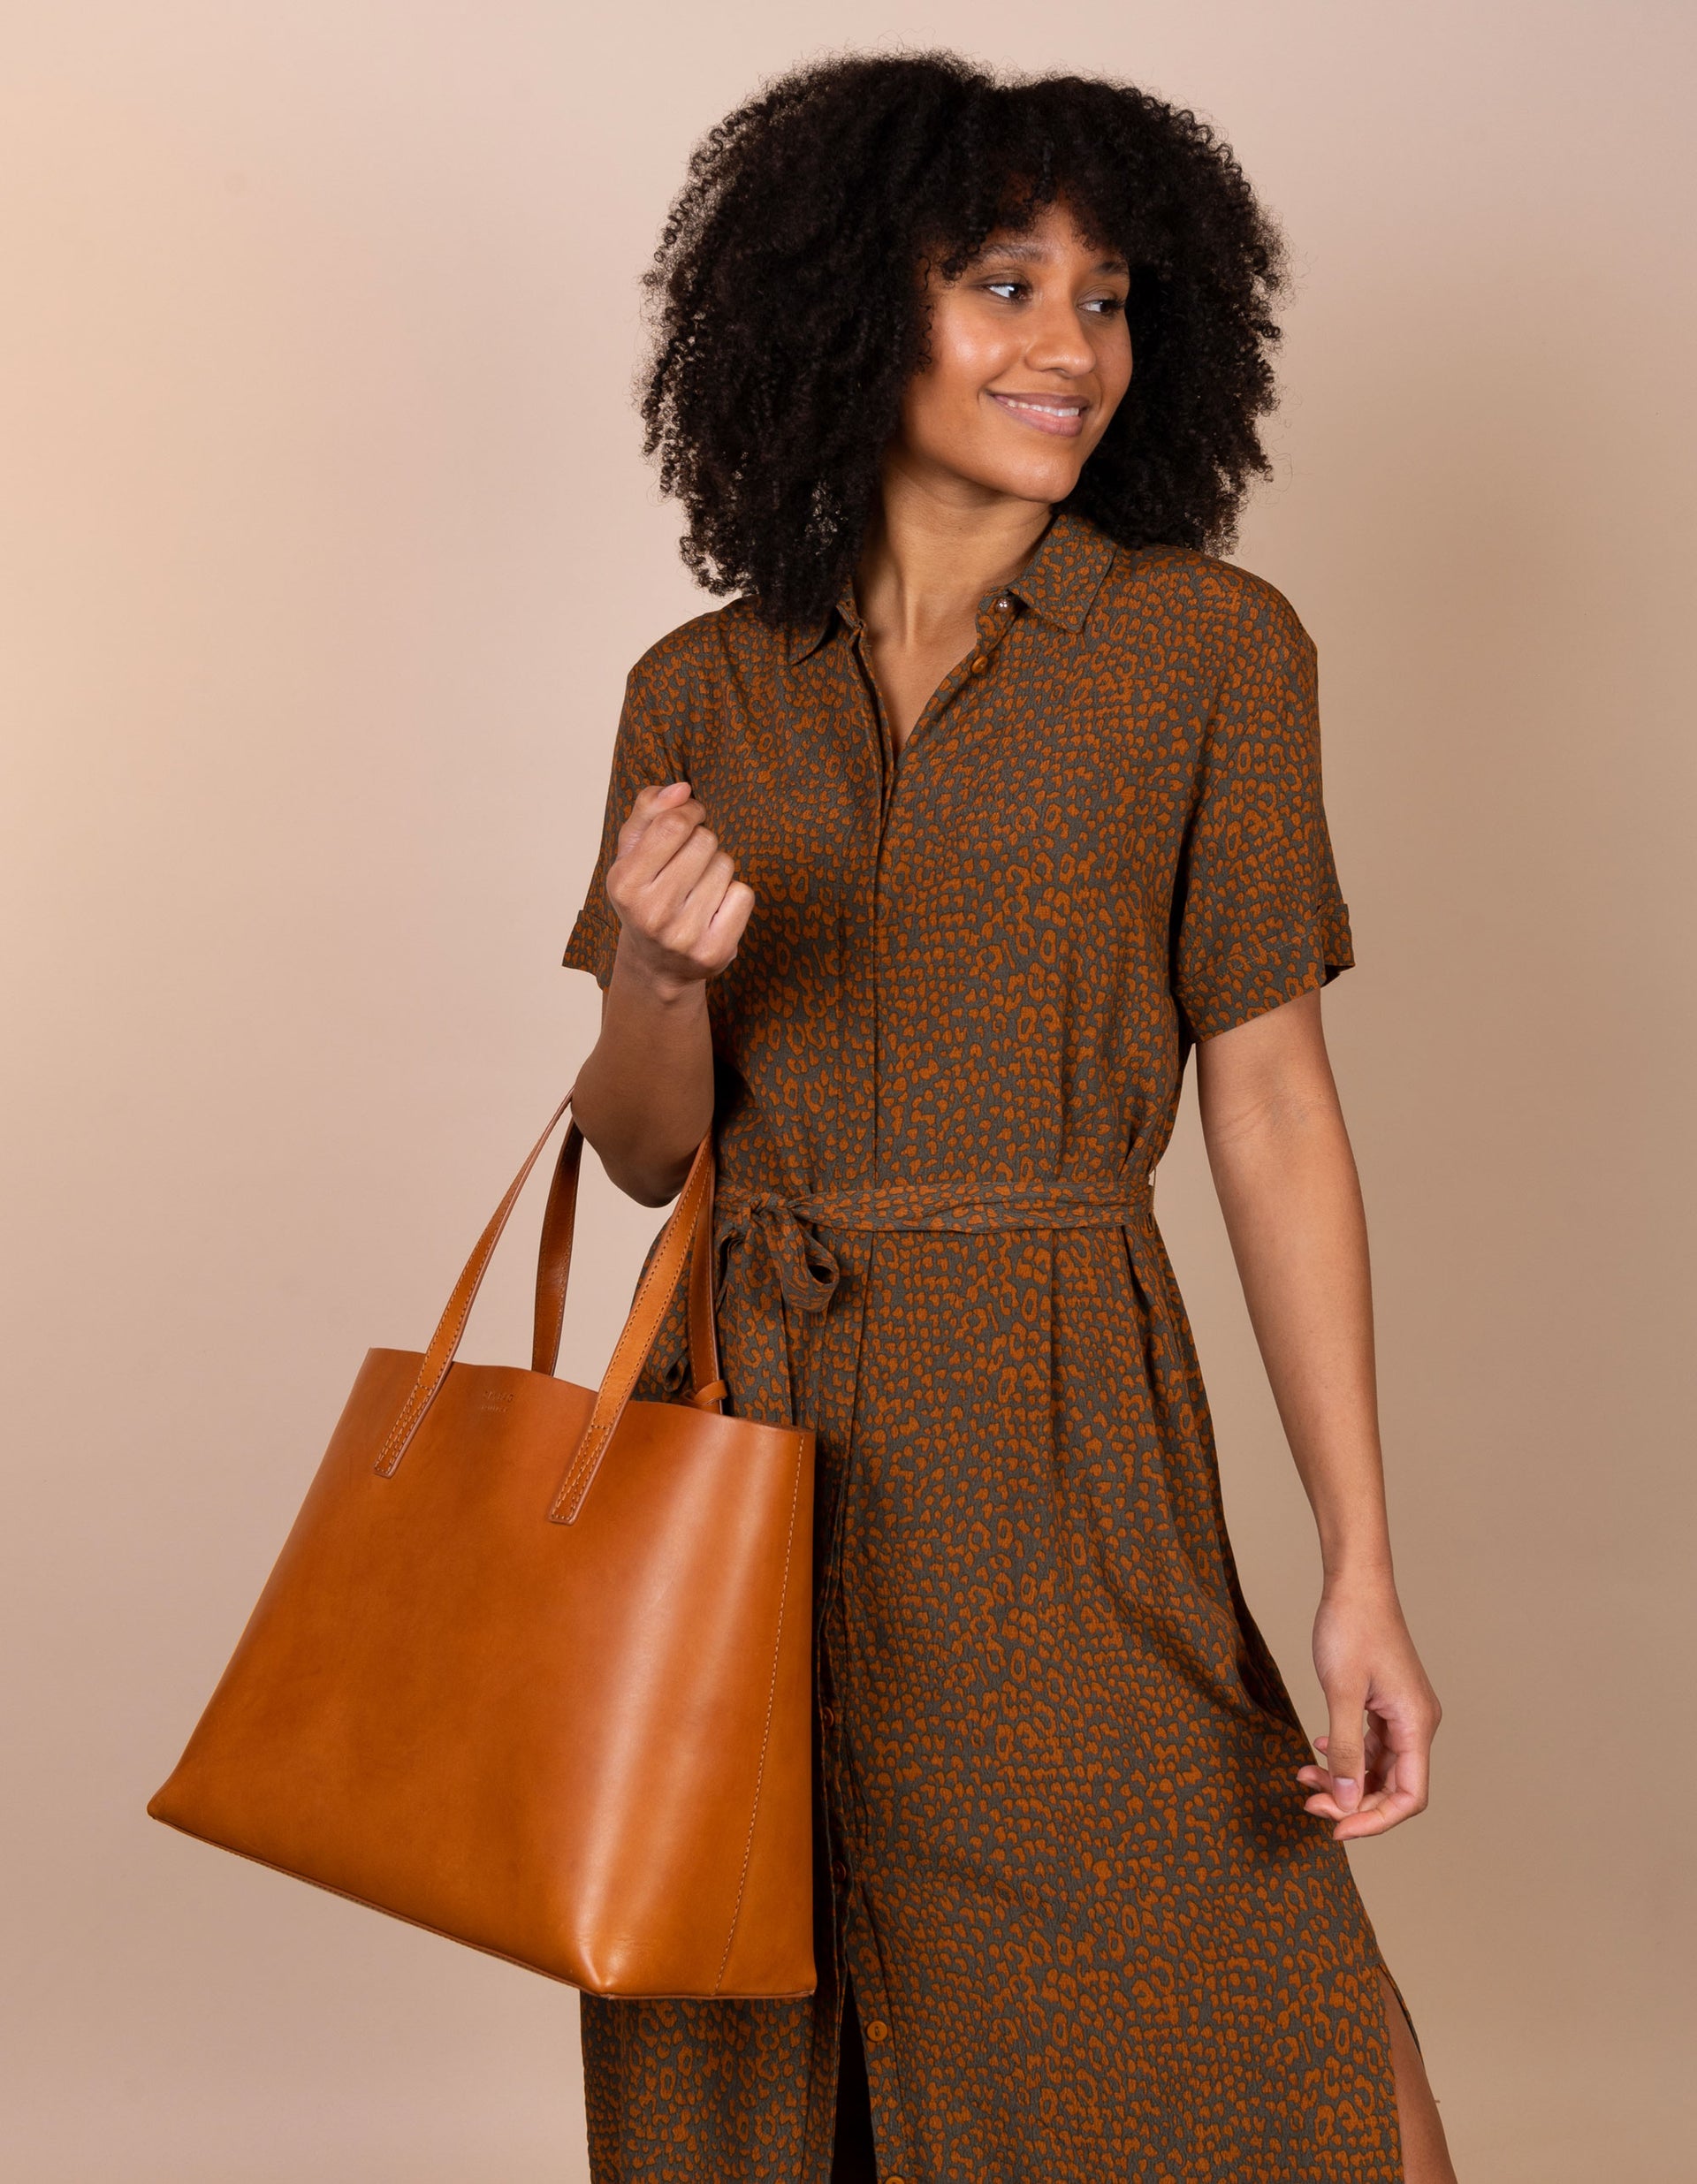 Sam Shopper - Cognac Classic Leather - Female product image held on the elbow